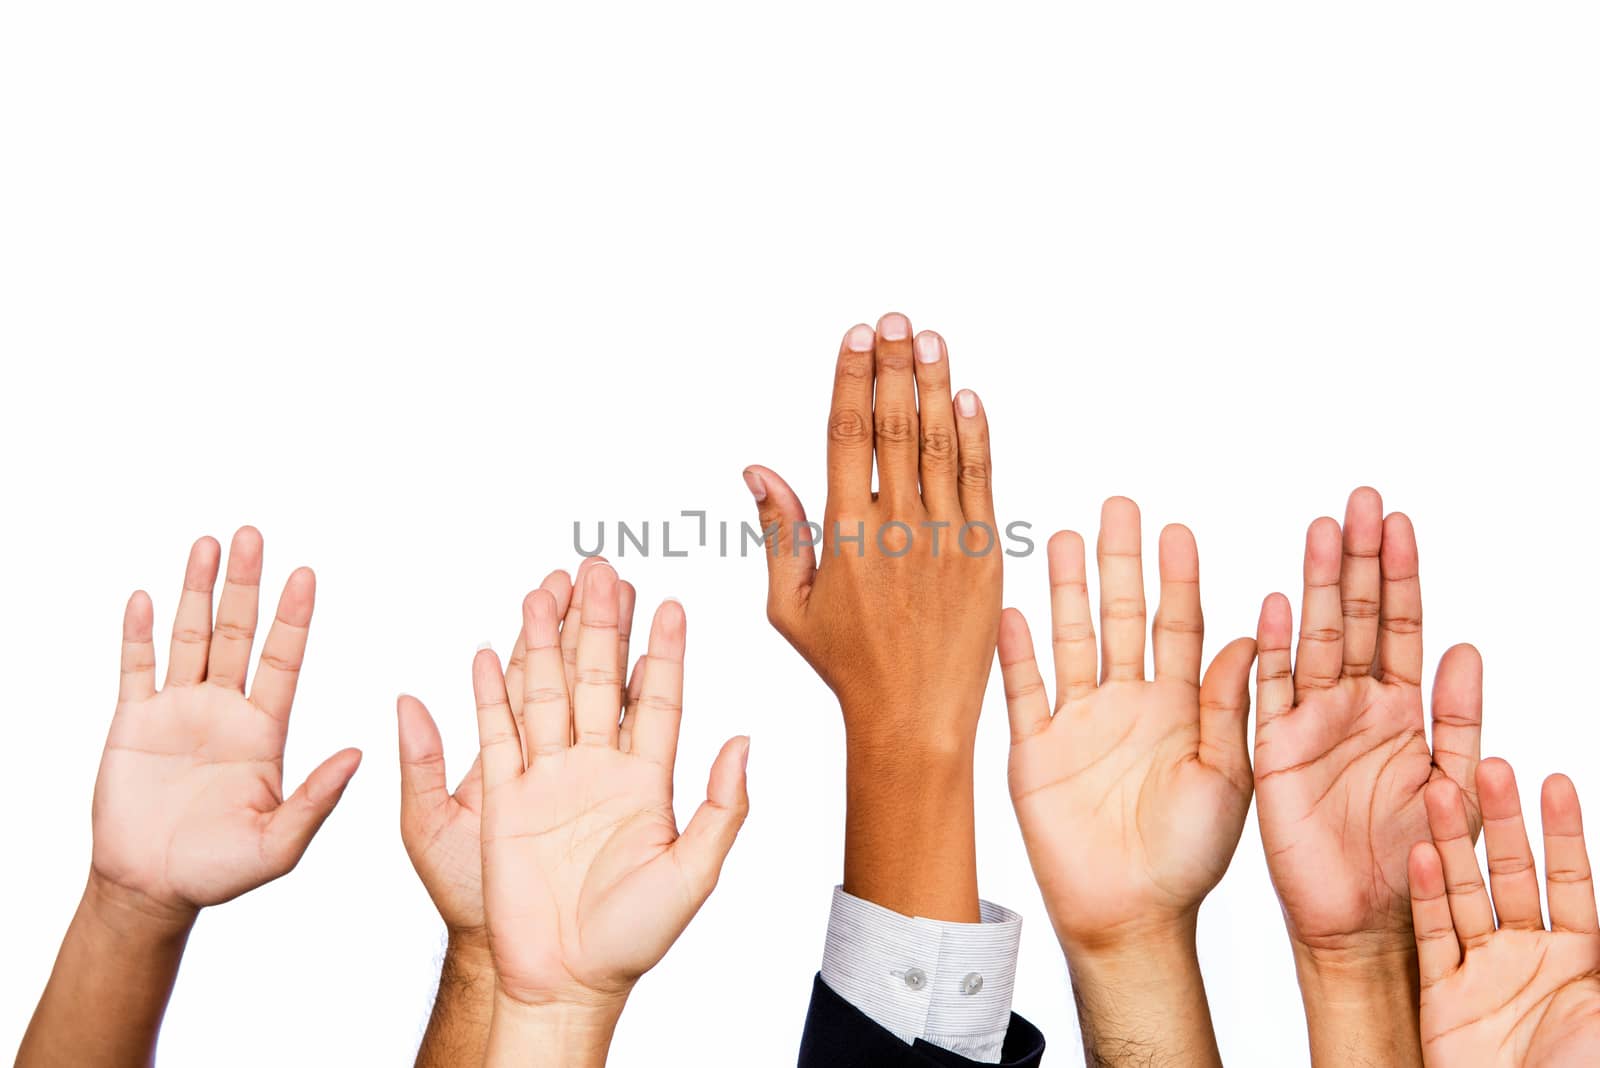 Diversity of Business Hands Raised